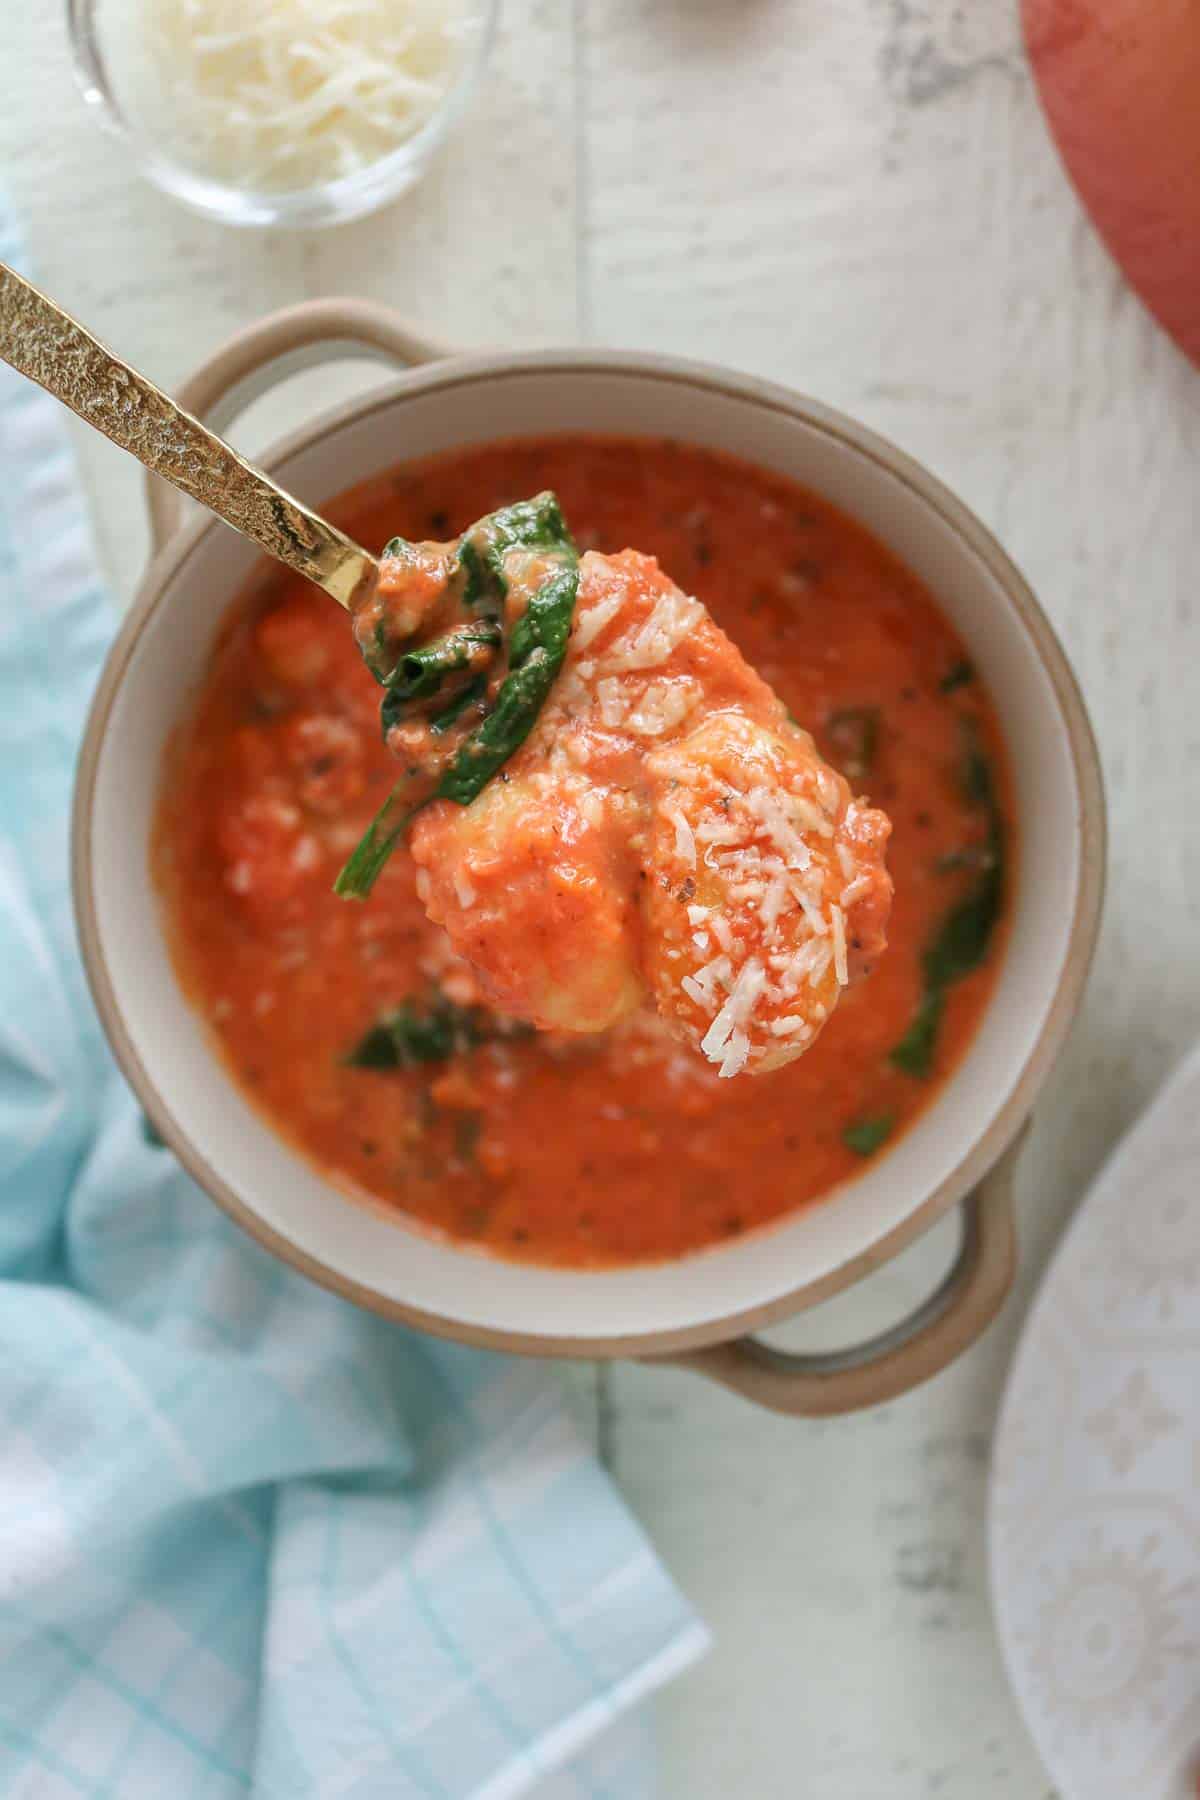 Spoonful of gnocchi tomato soup from a bowl.